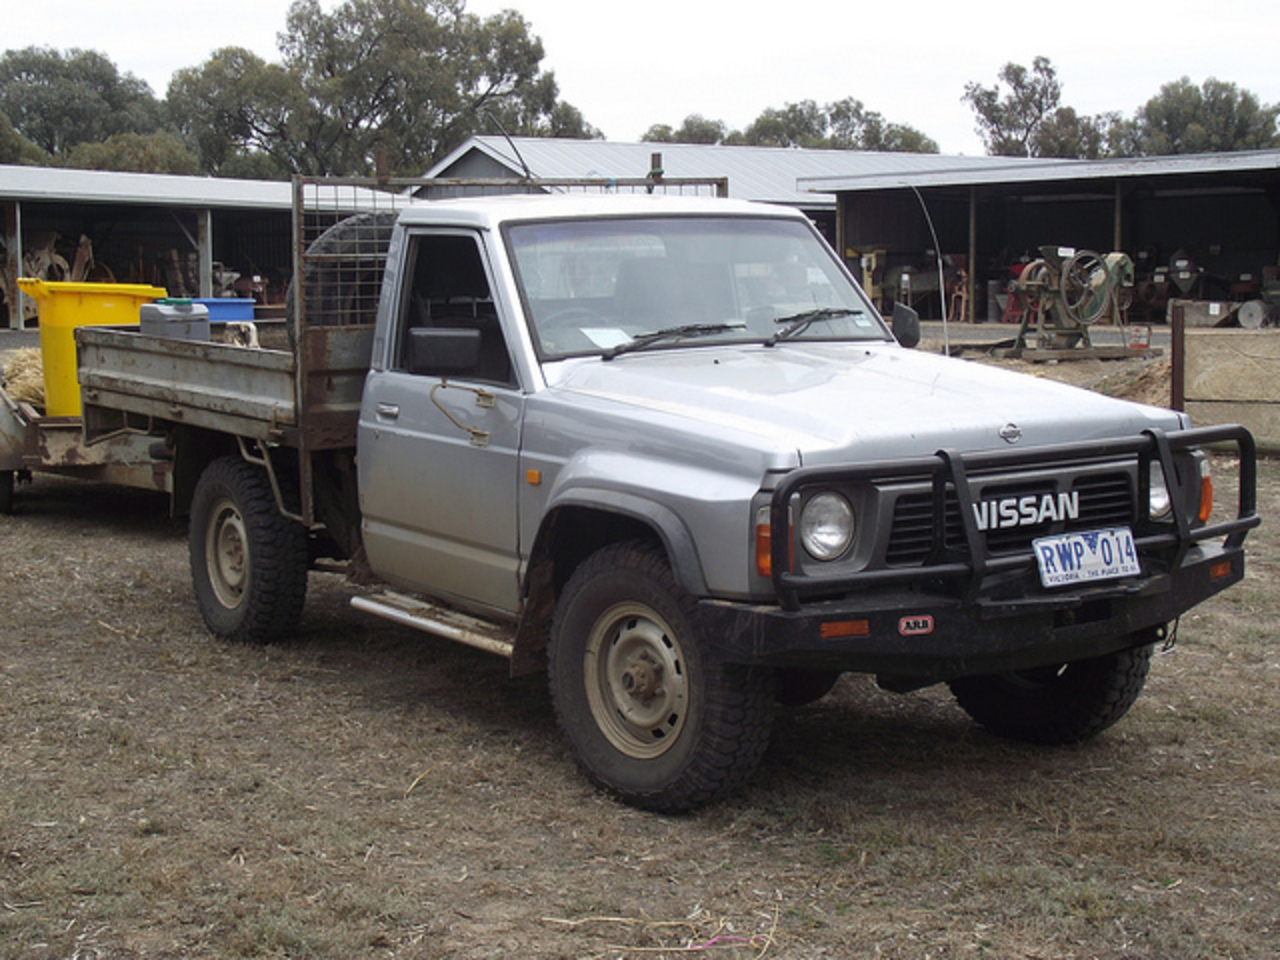 Another Ute out the back of the Museum, a 1992 Nissan Patrol 4x4 Ute.